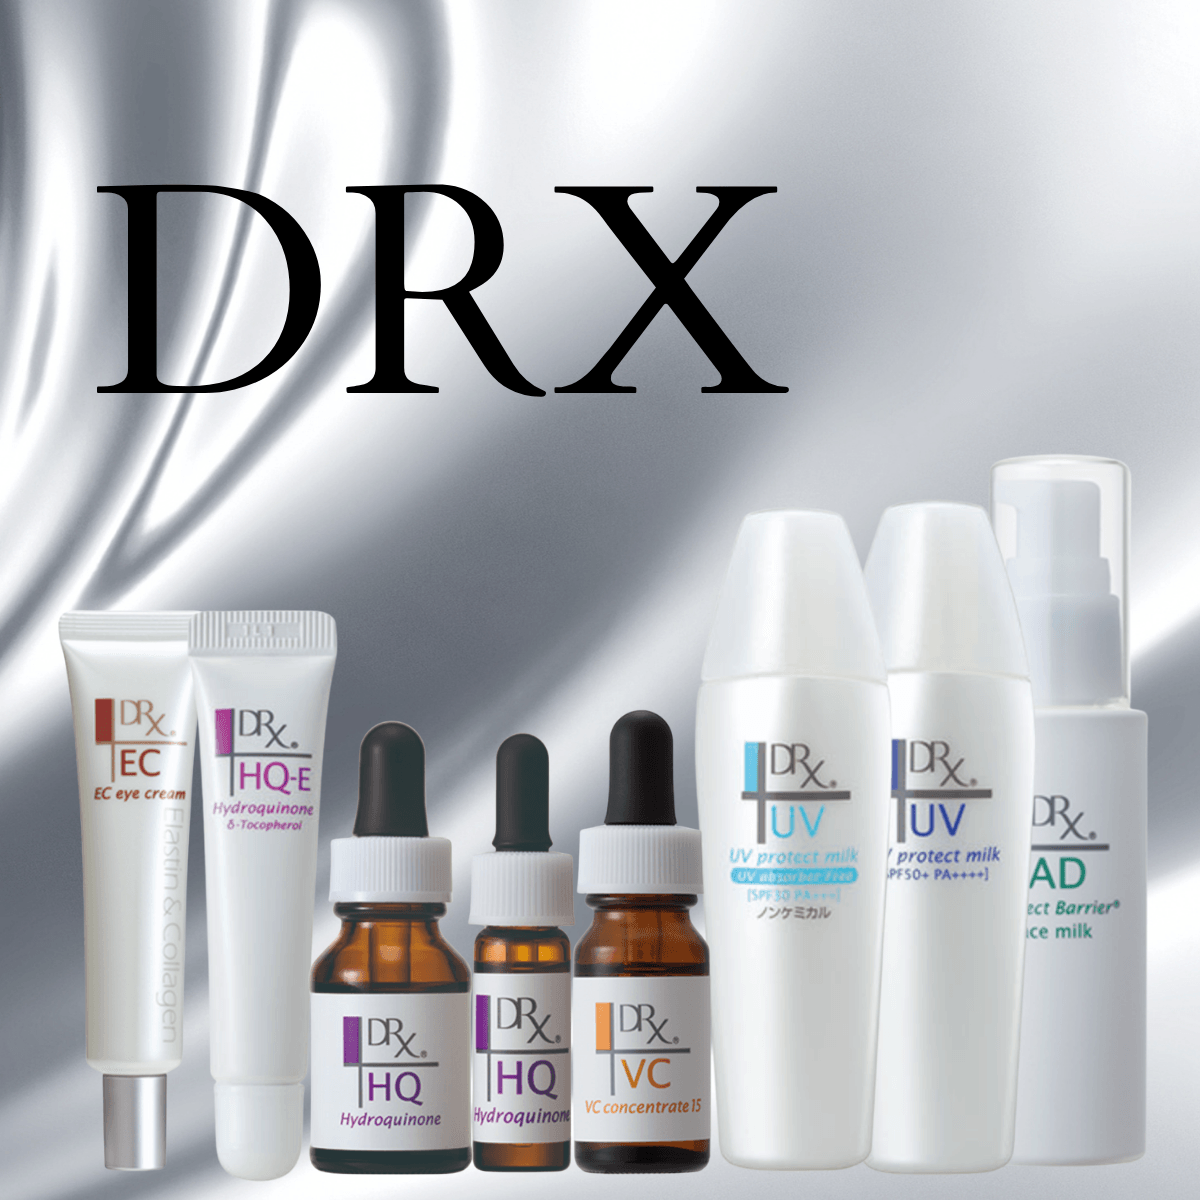 DRX - From DR